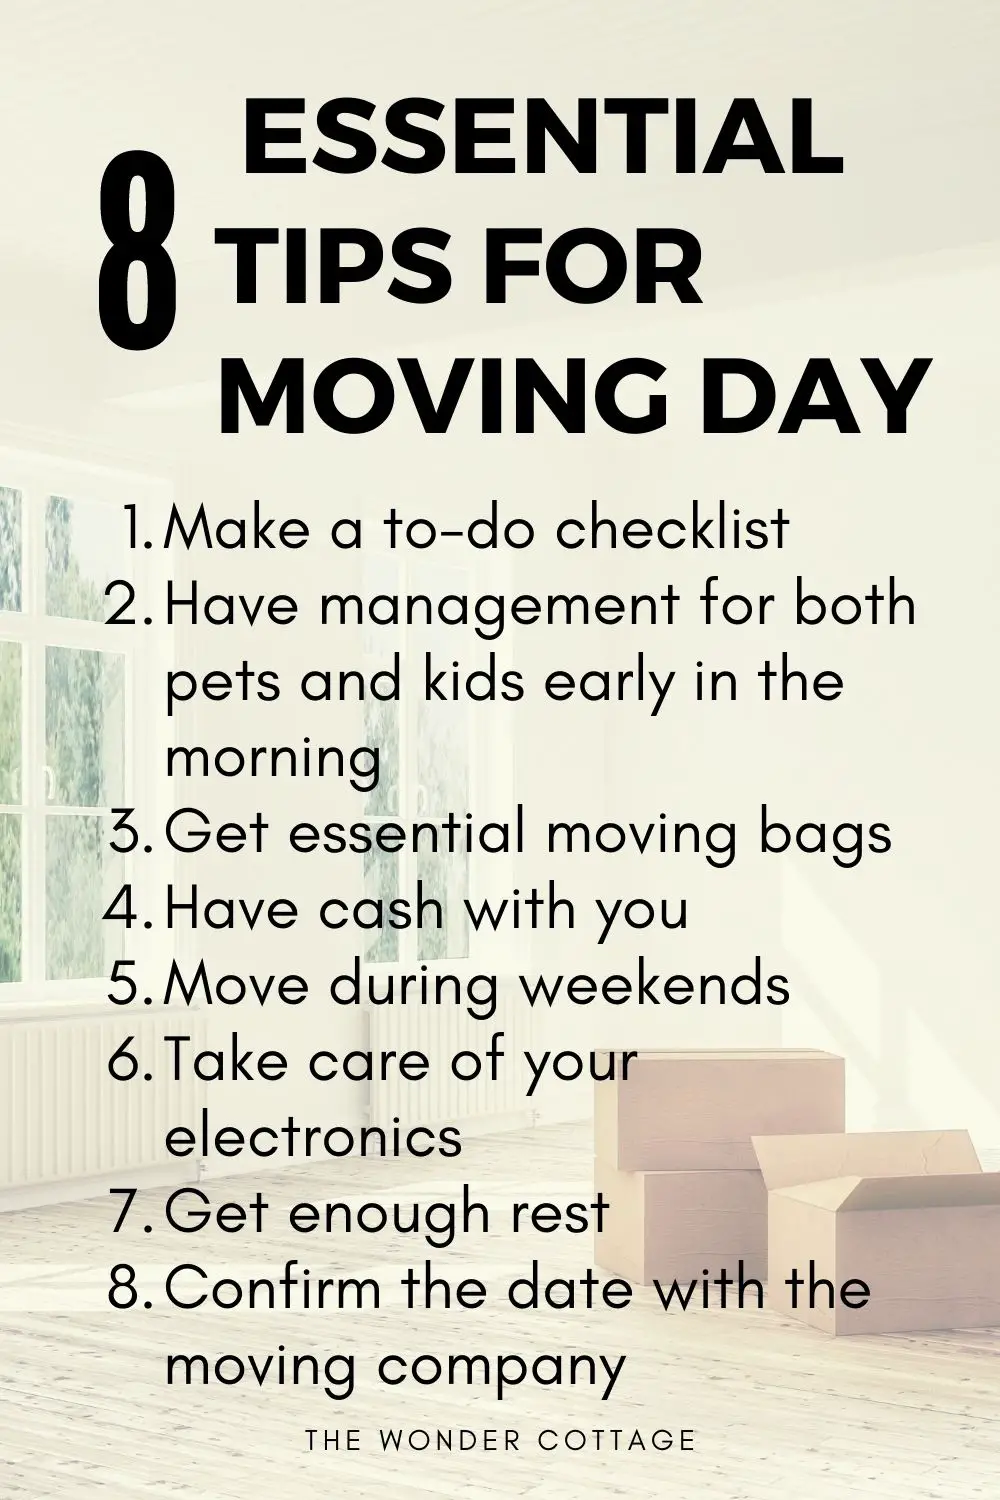 8 essential tips for moving day